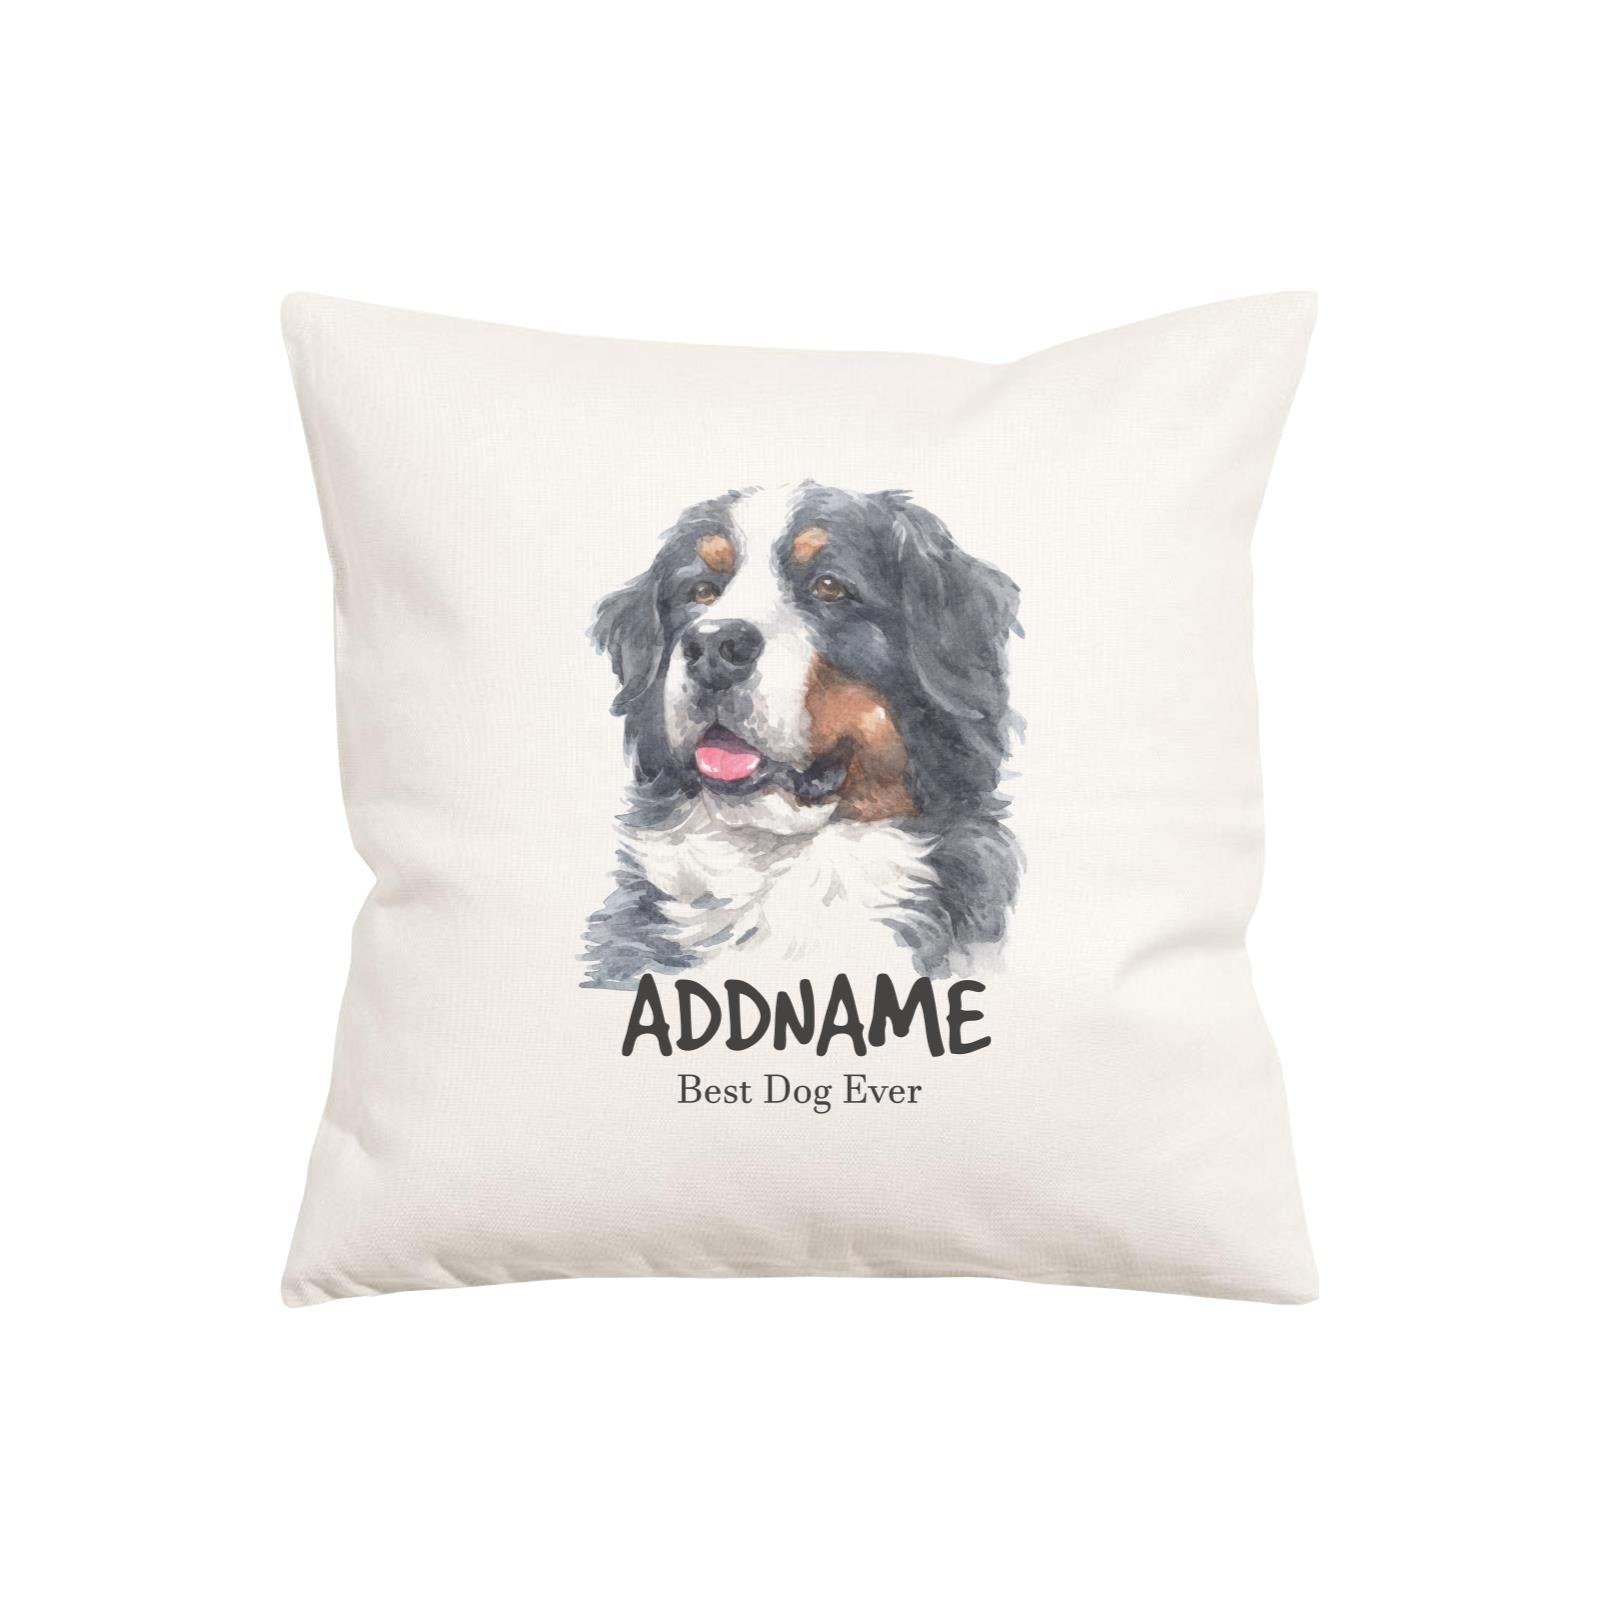 Watercolor Dog Series Bernese Mountain Best Dog Ever Addname Pillow Cushion